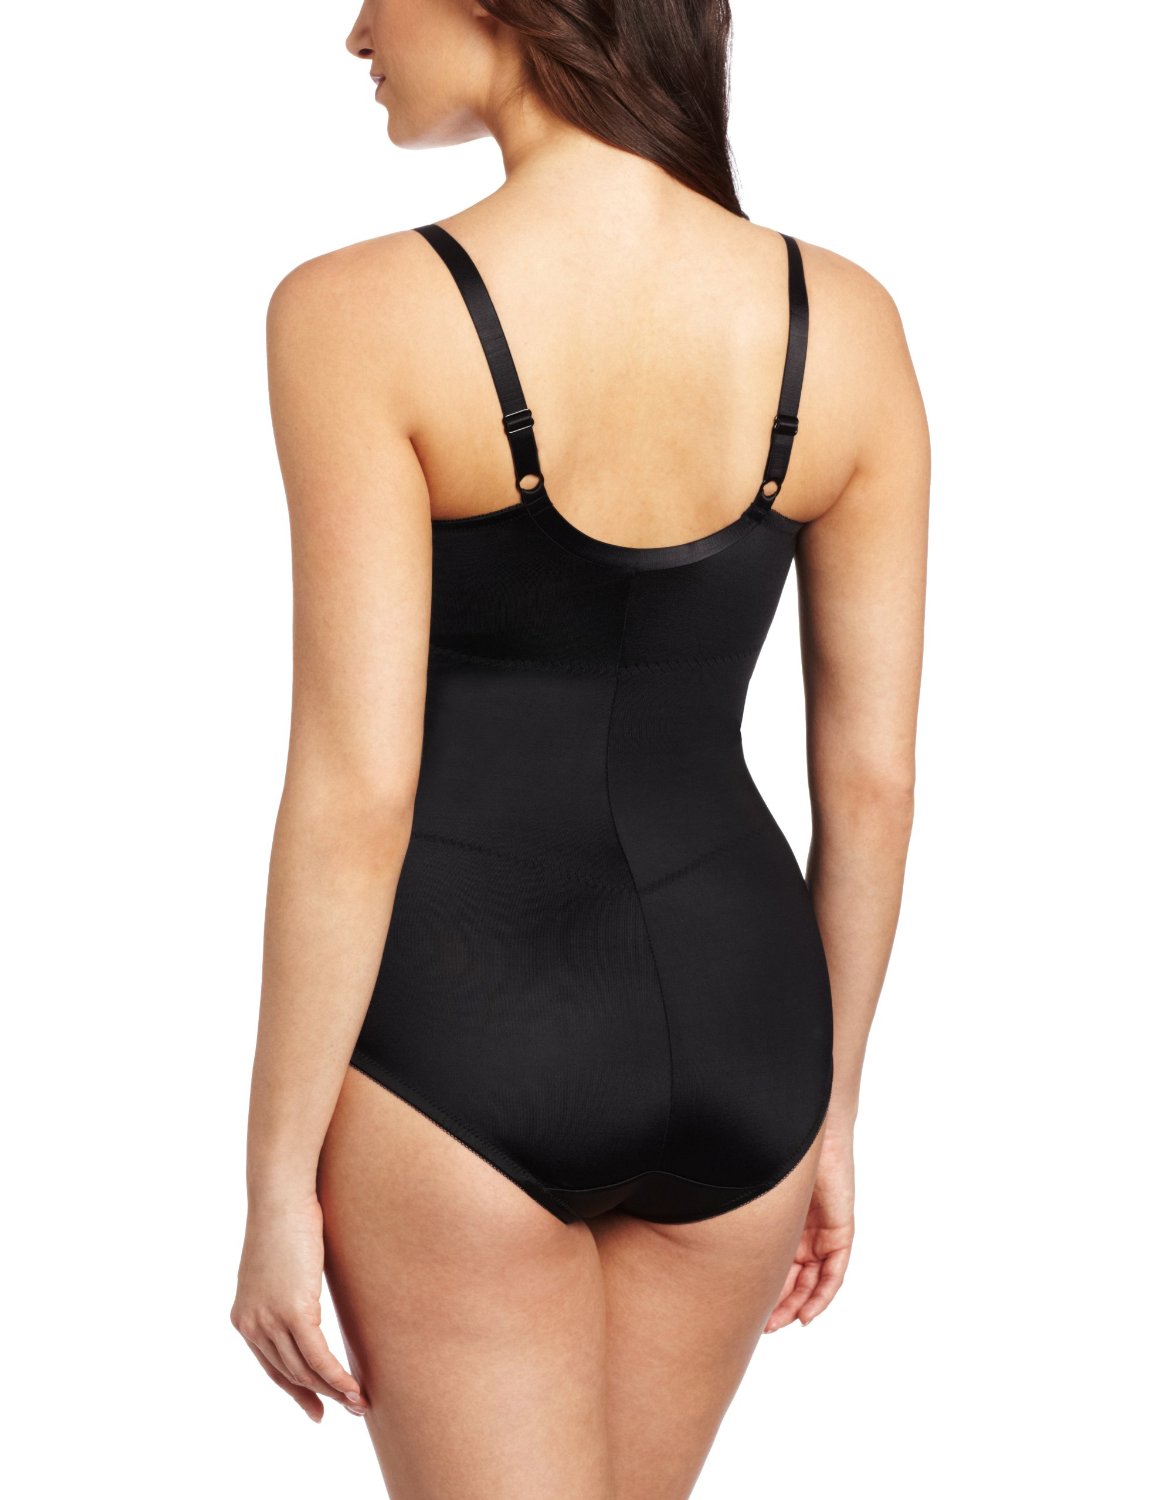 Maidenform Womens Flexees Embellished Firm Control Bodysuit Style-1456